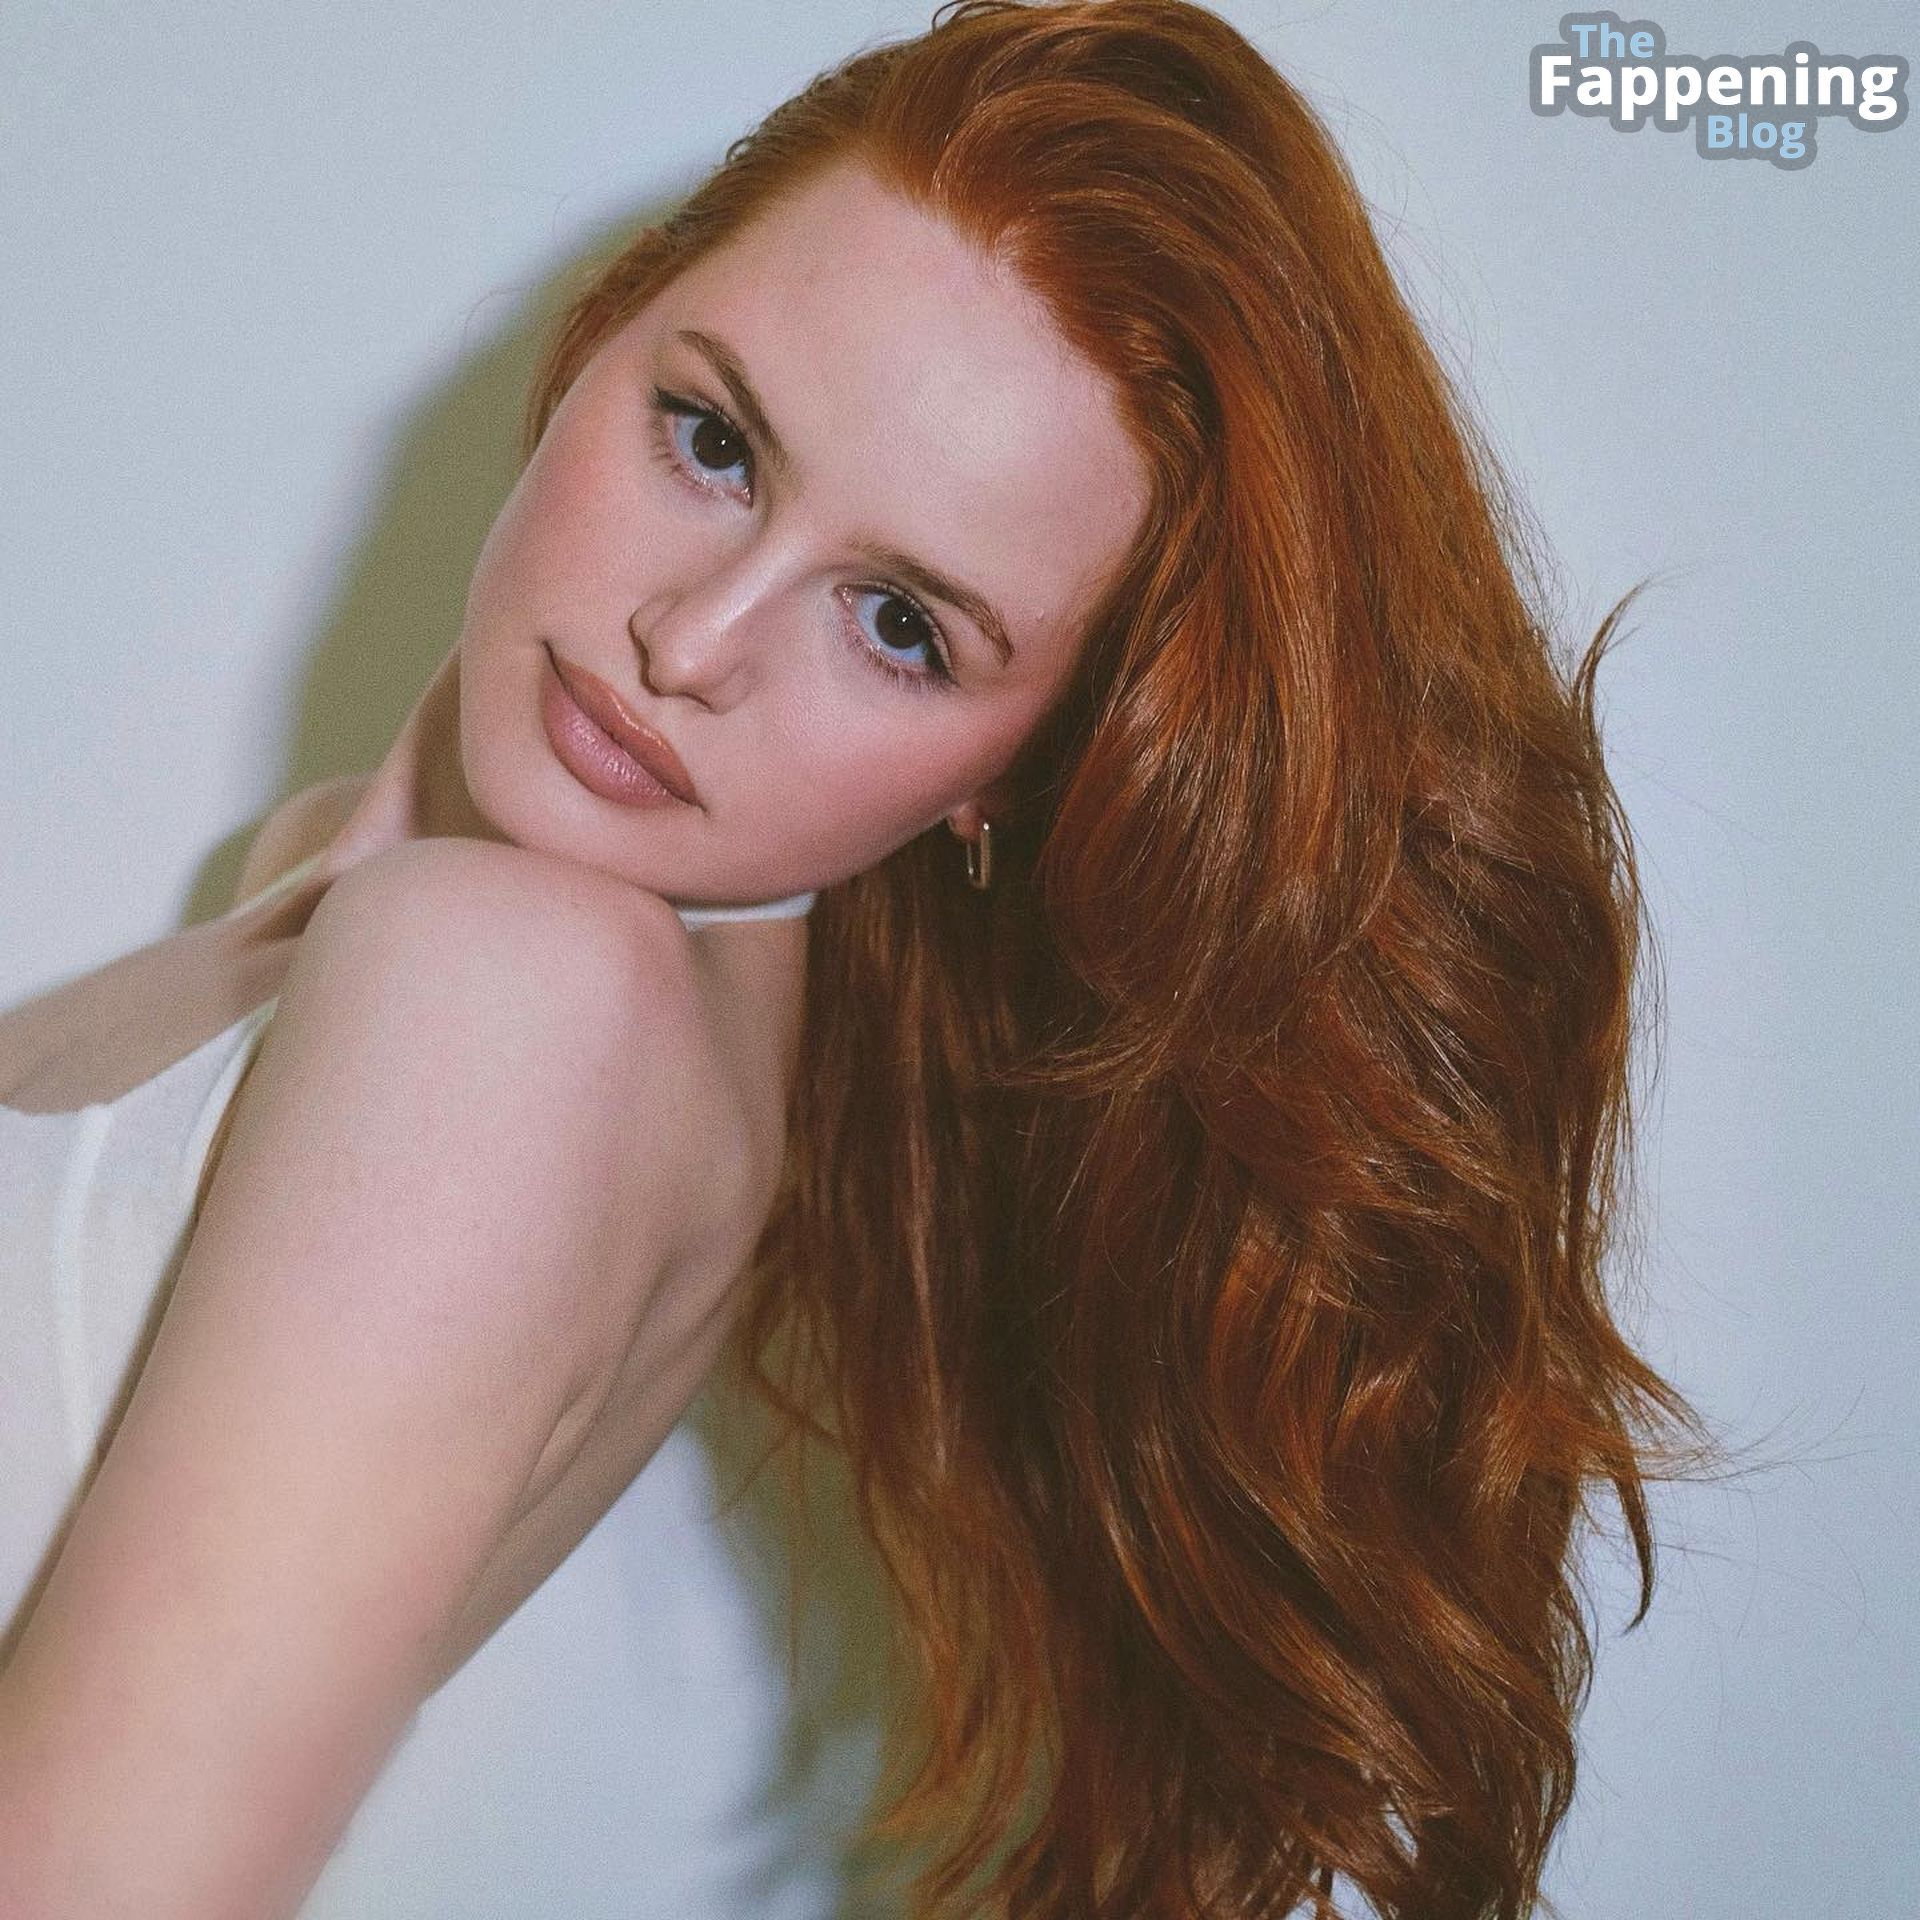 Madelaine-Petsch-Sexy-12-The-Fappening-Blog.jpg